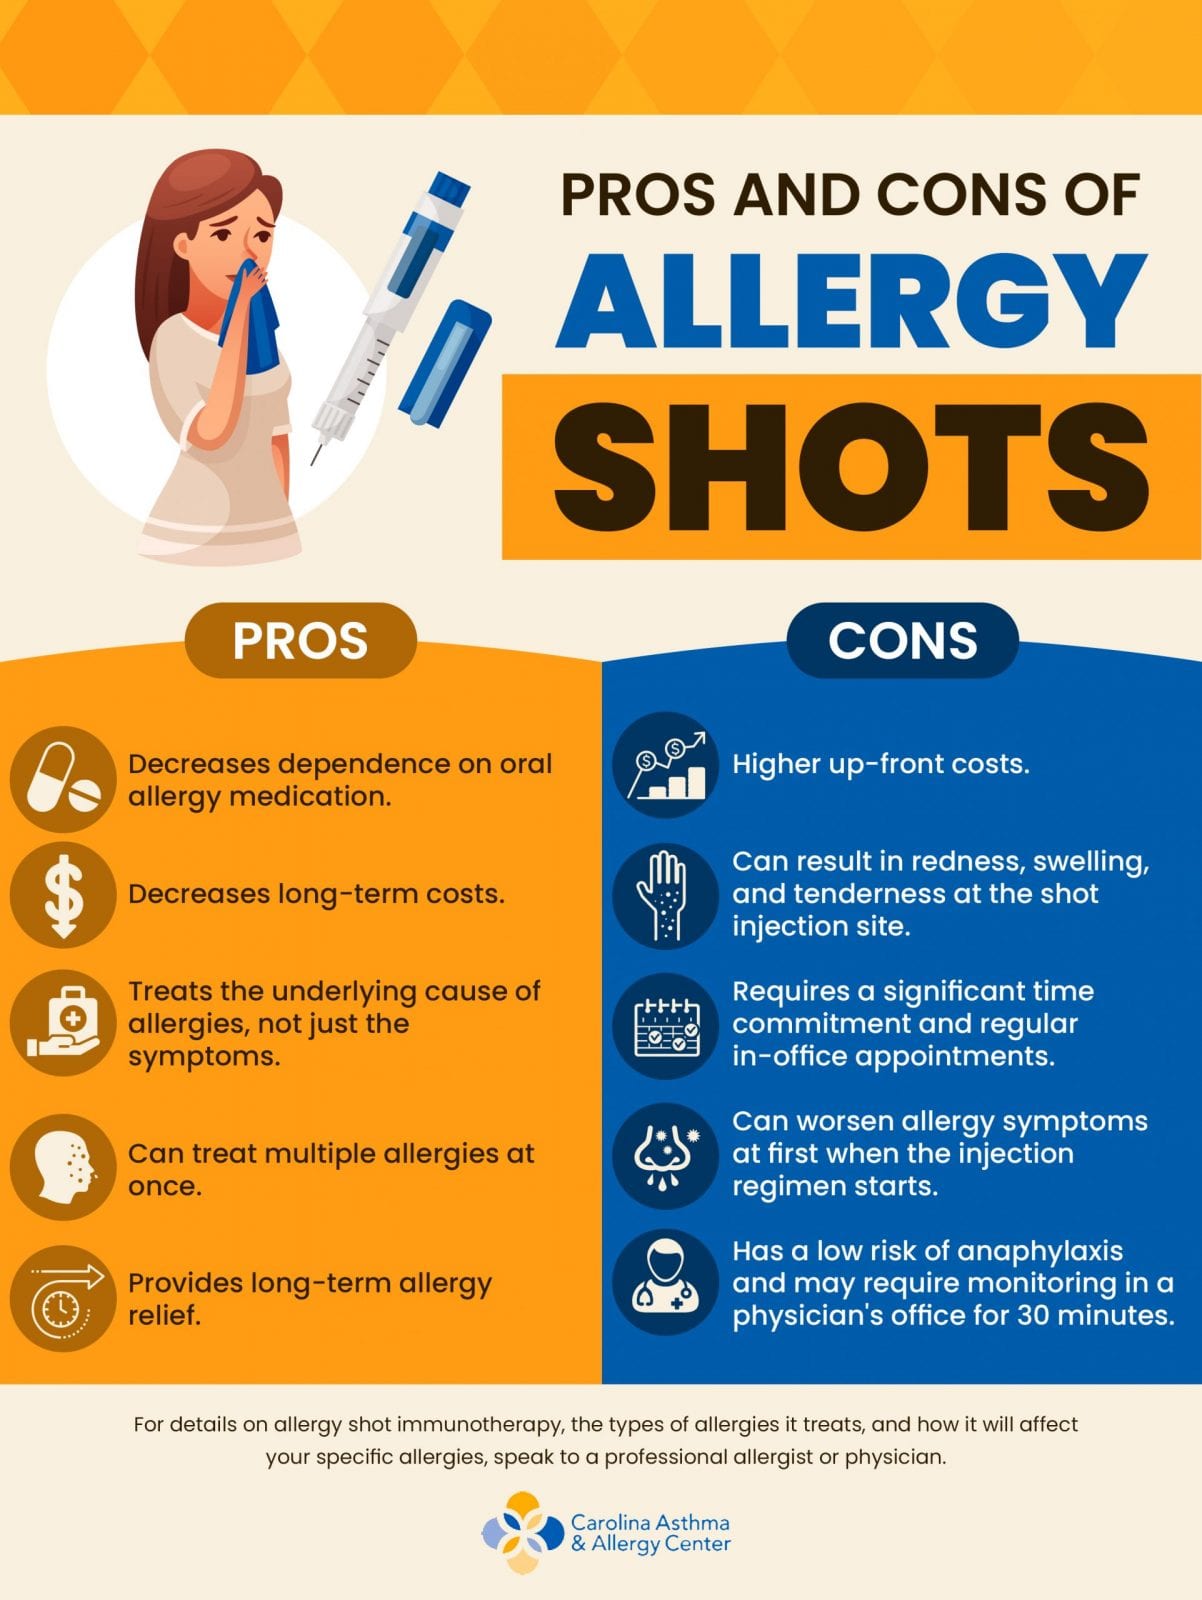 The benefits and disadvantages of allergy shots (subcutaneous immunotherapy).